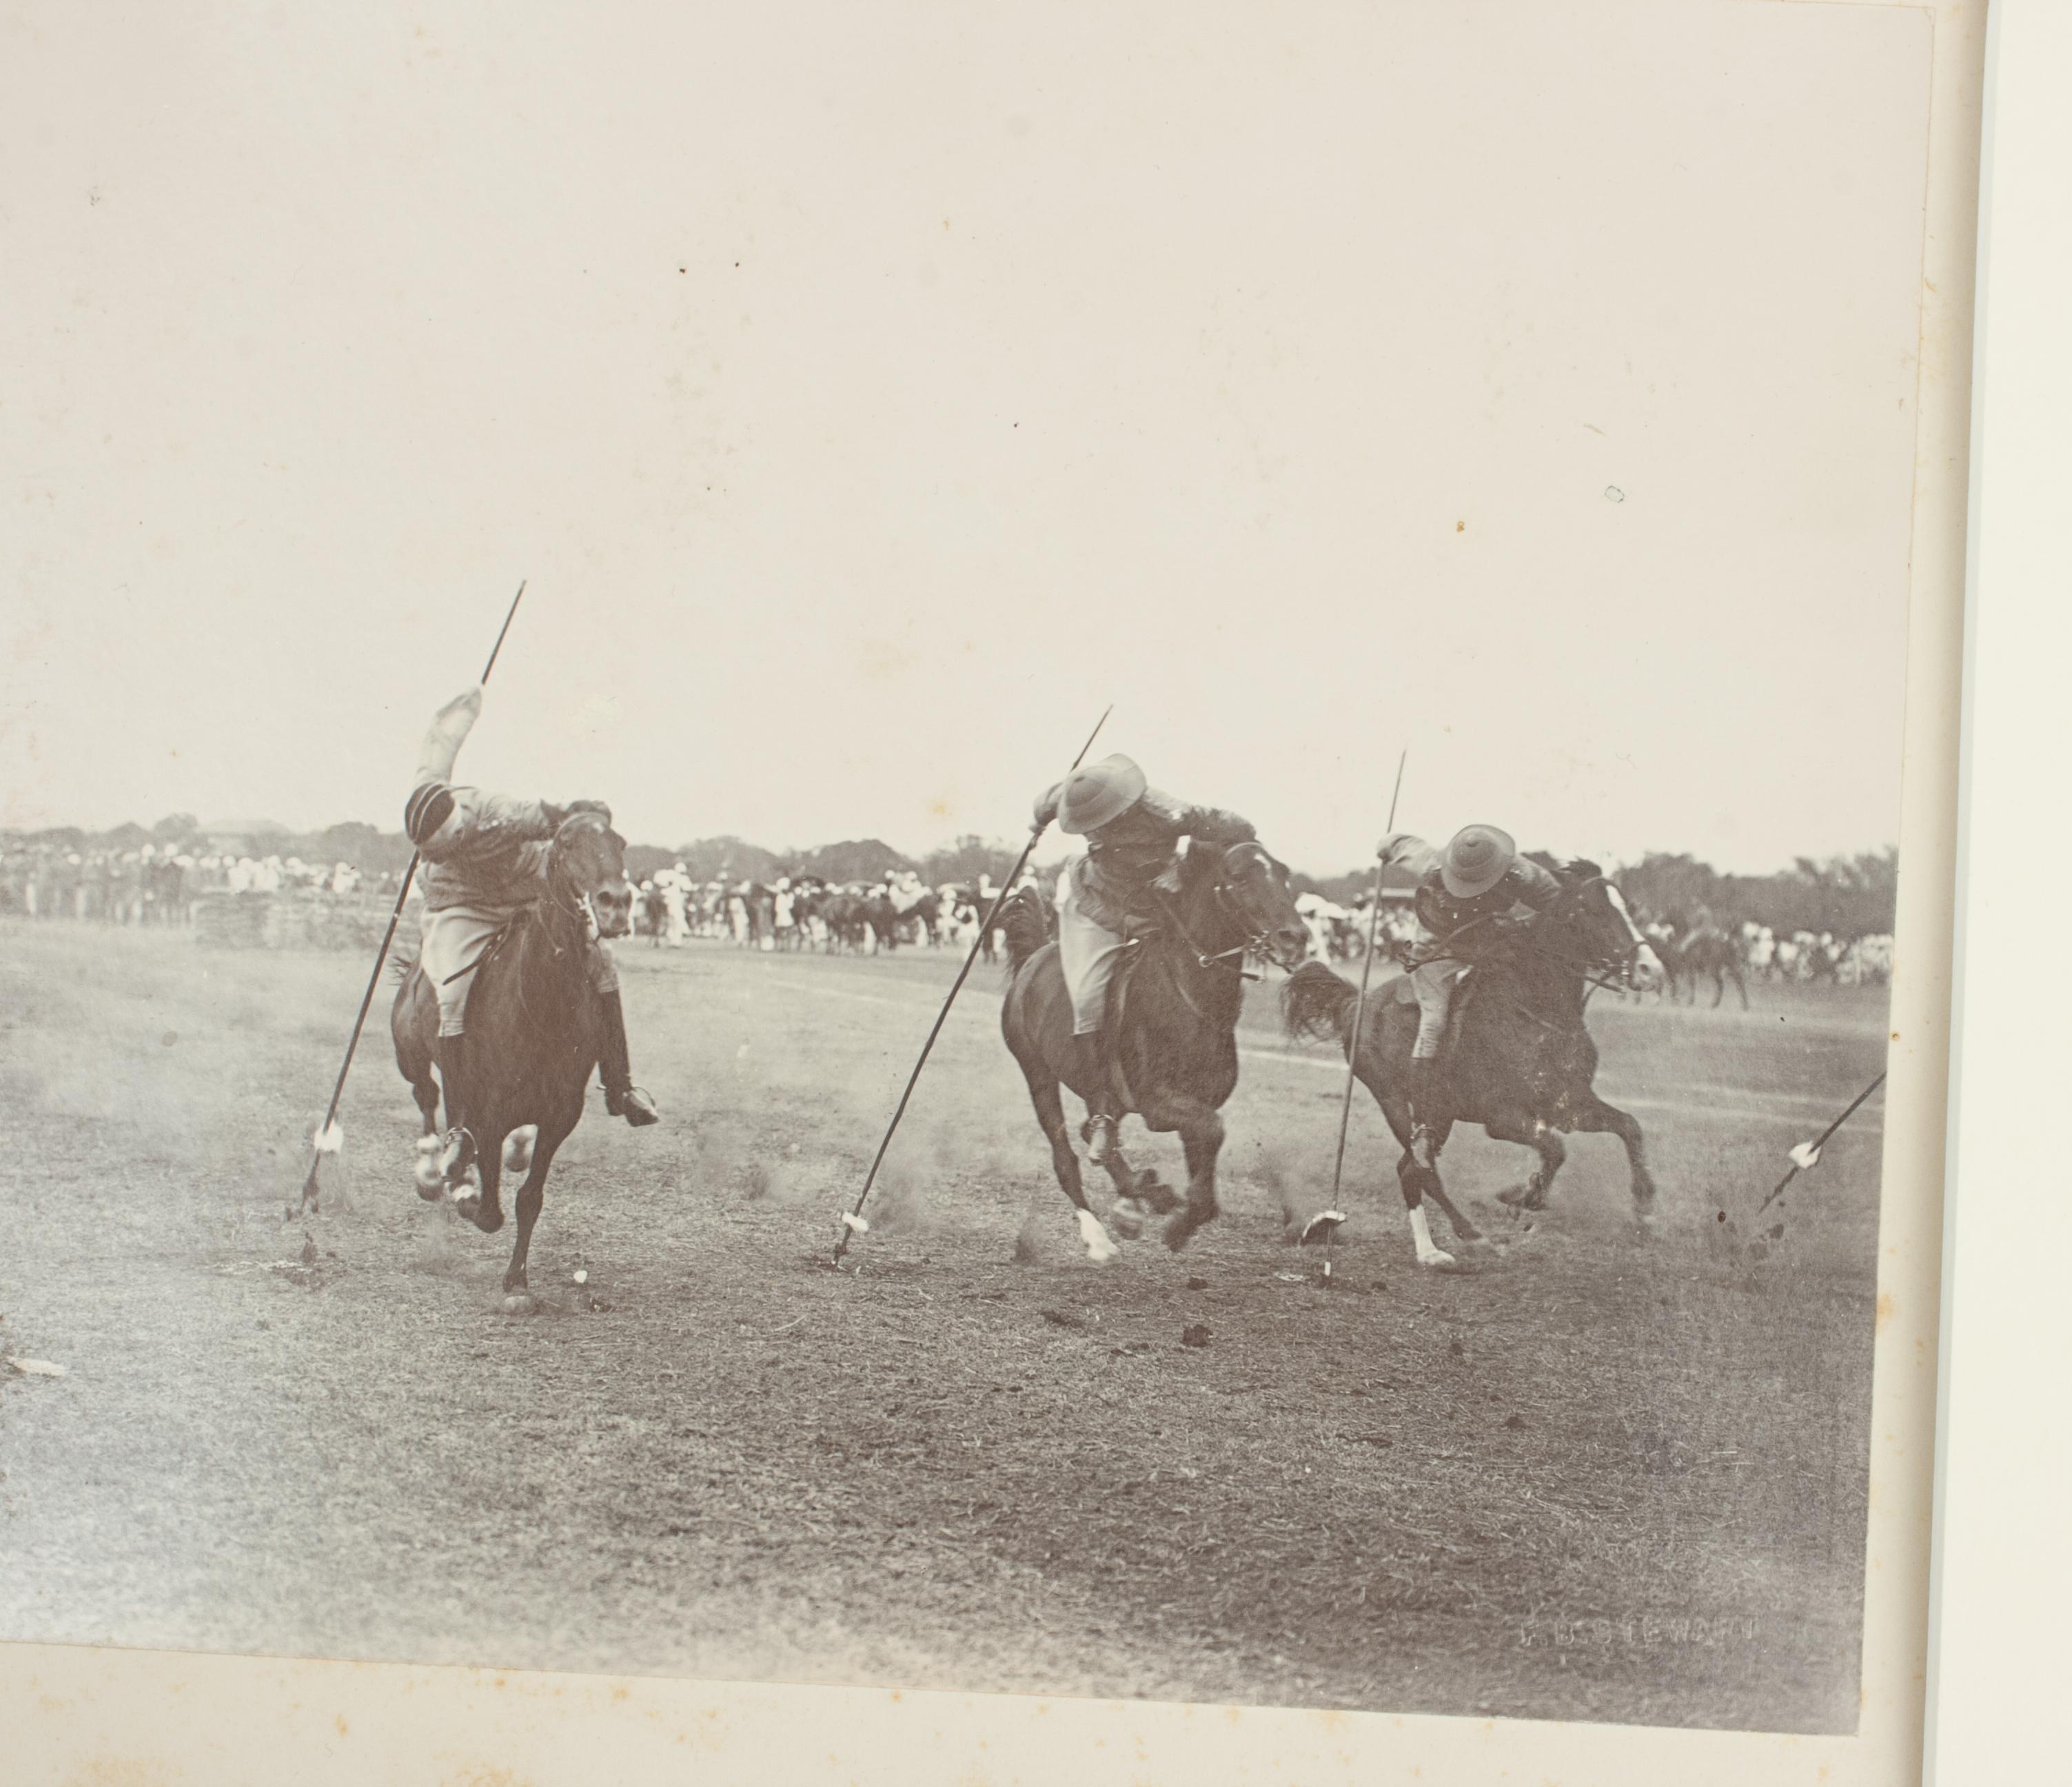 Sporting Art Vintage Sepia Tent Pegging Photograph For Sale